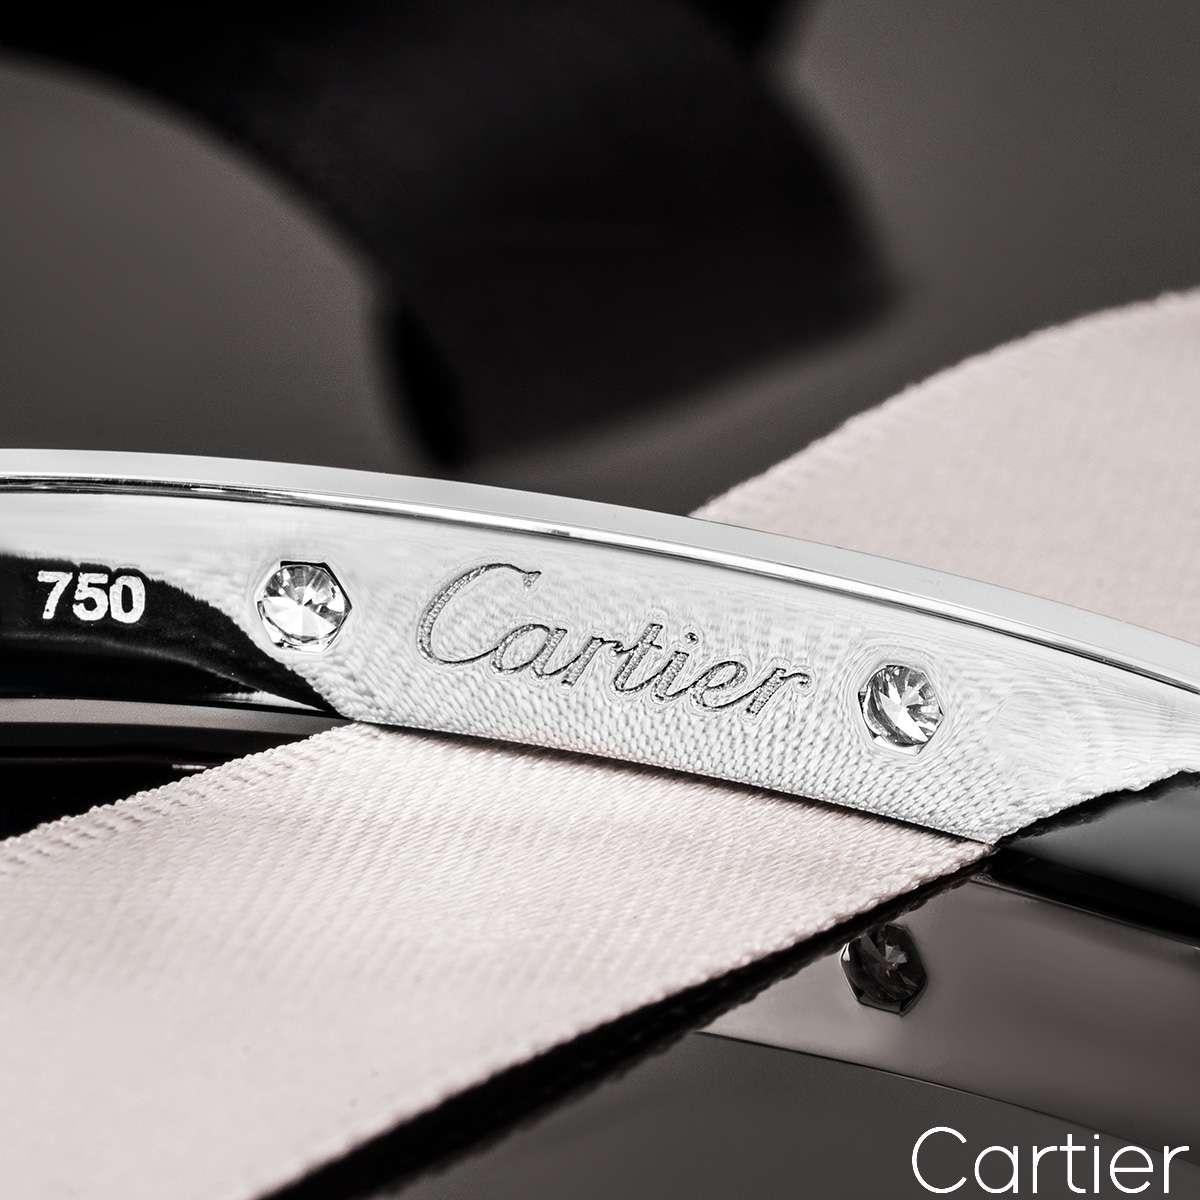 Cartier White Gold Full Diamond Love Bracelet Size 17 B6040717 In Excellent Condition For Sale In London, GB